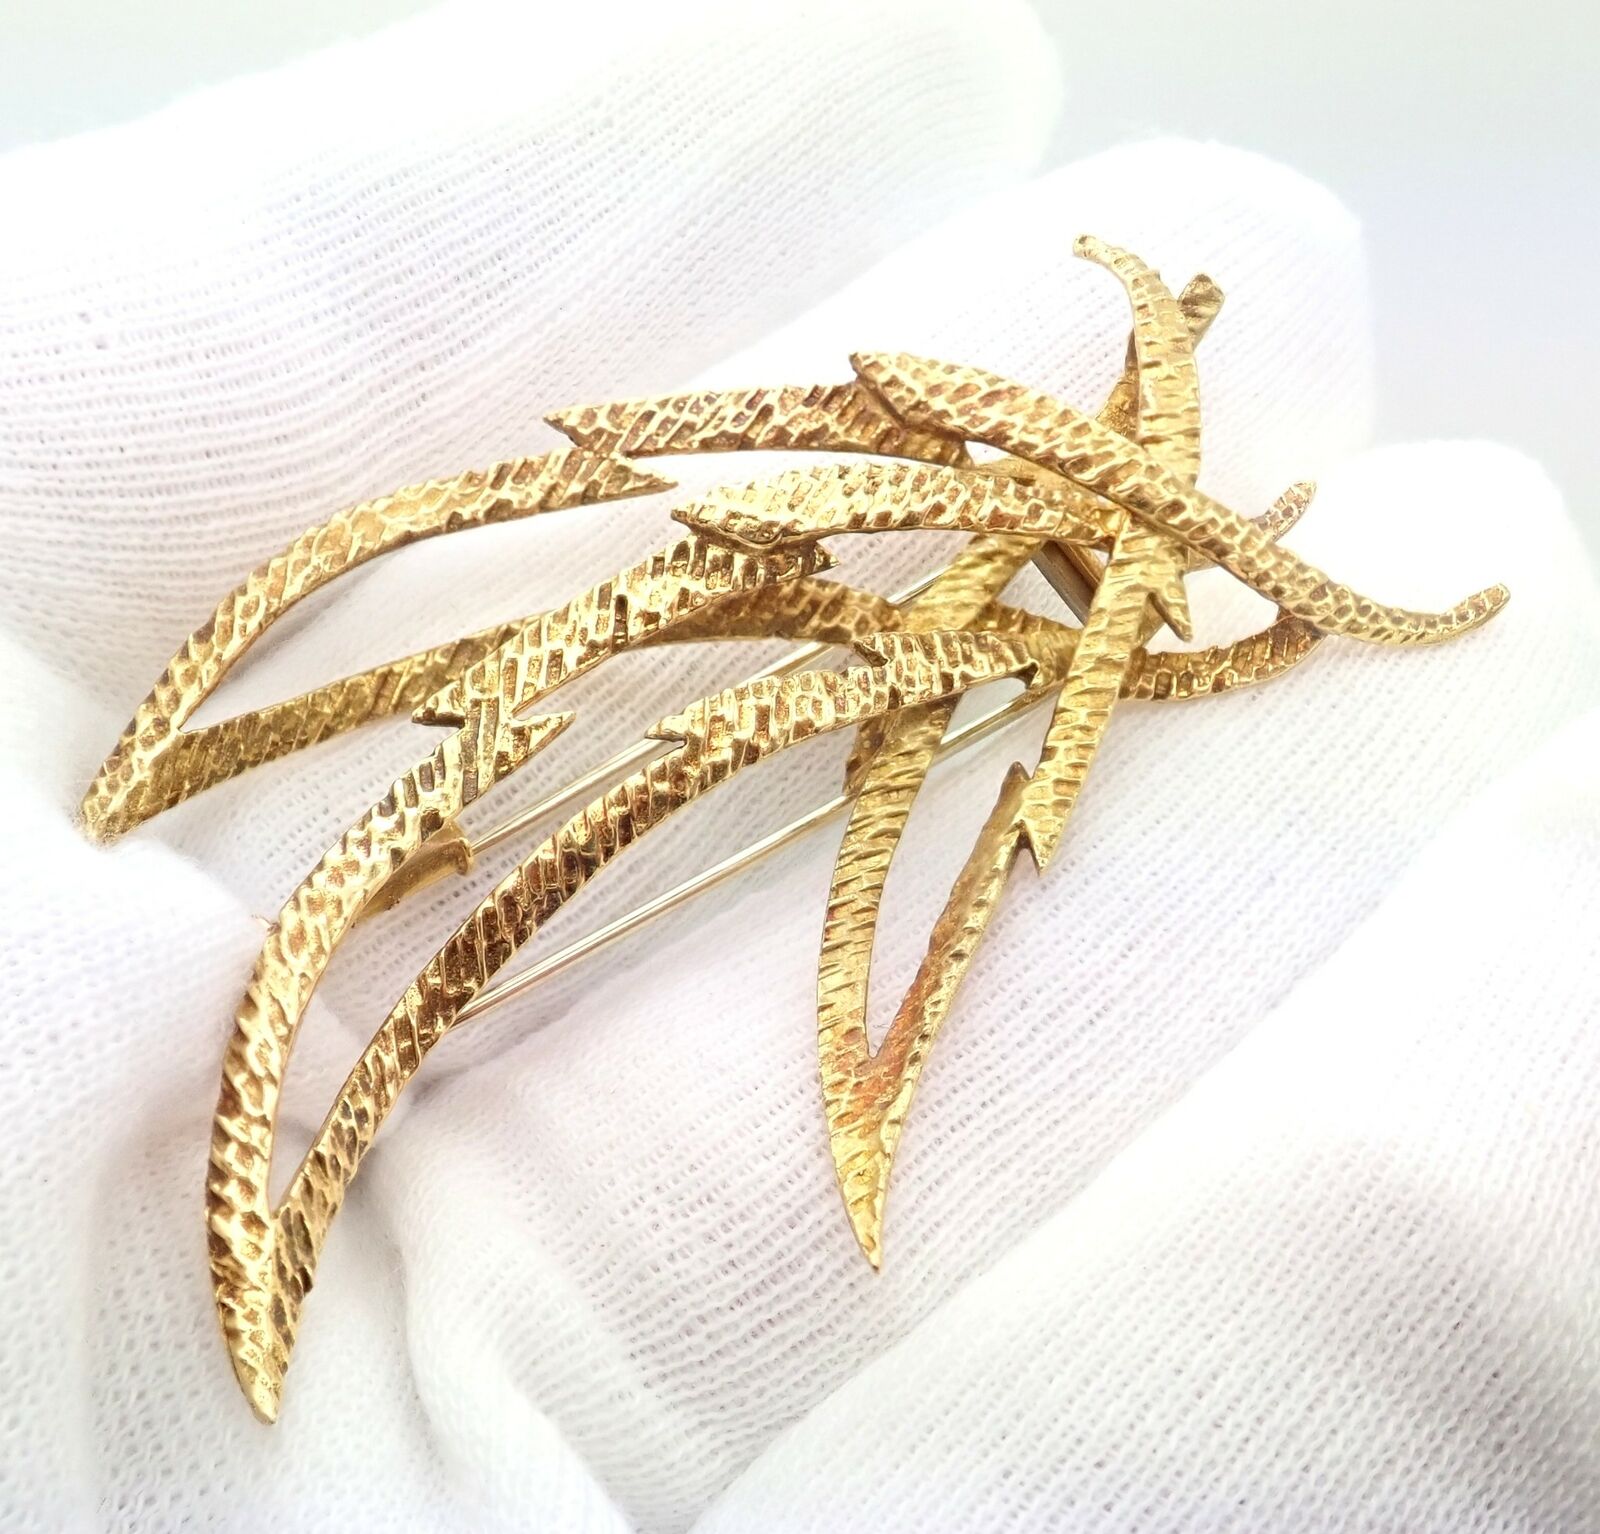 Hermes Jewelry & Watches:Fine Jewelry:Brooches & Pins Rare Authentic Vintage Hermes Paris 18k Yellow Gold Starburst Comet Brooch Pin